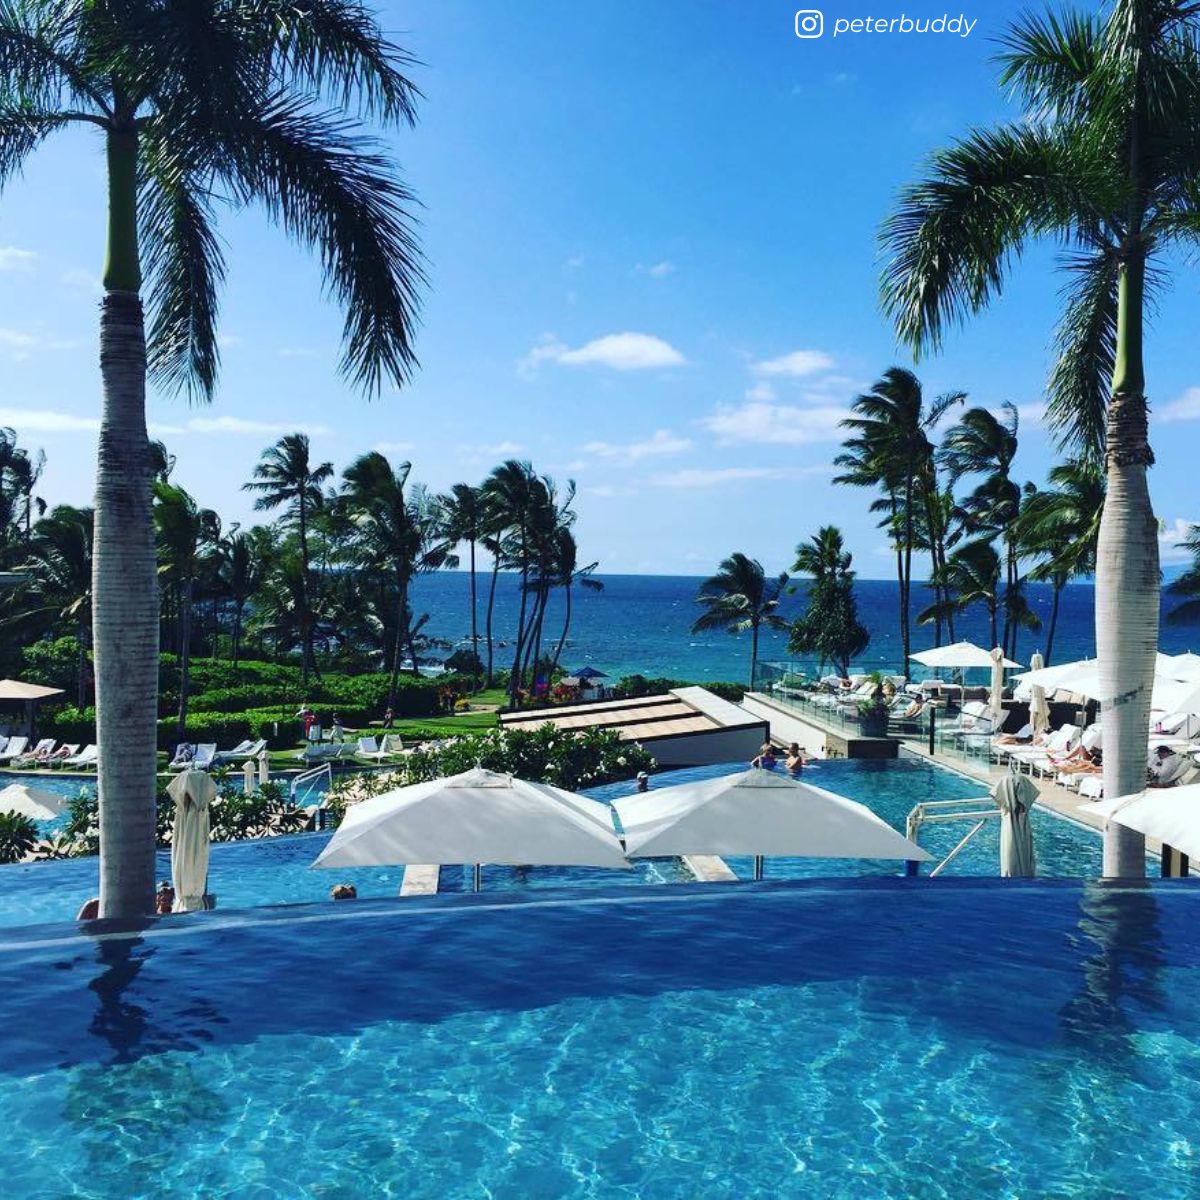 Photo of beautiful hotel pool and palm trees in Hawaii